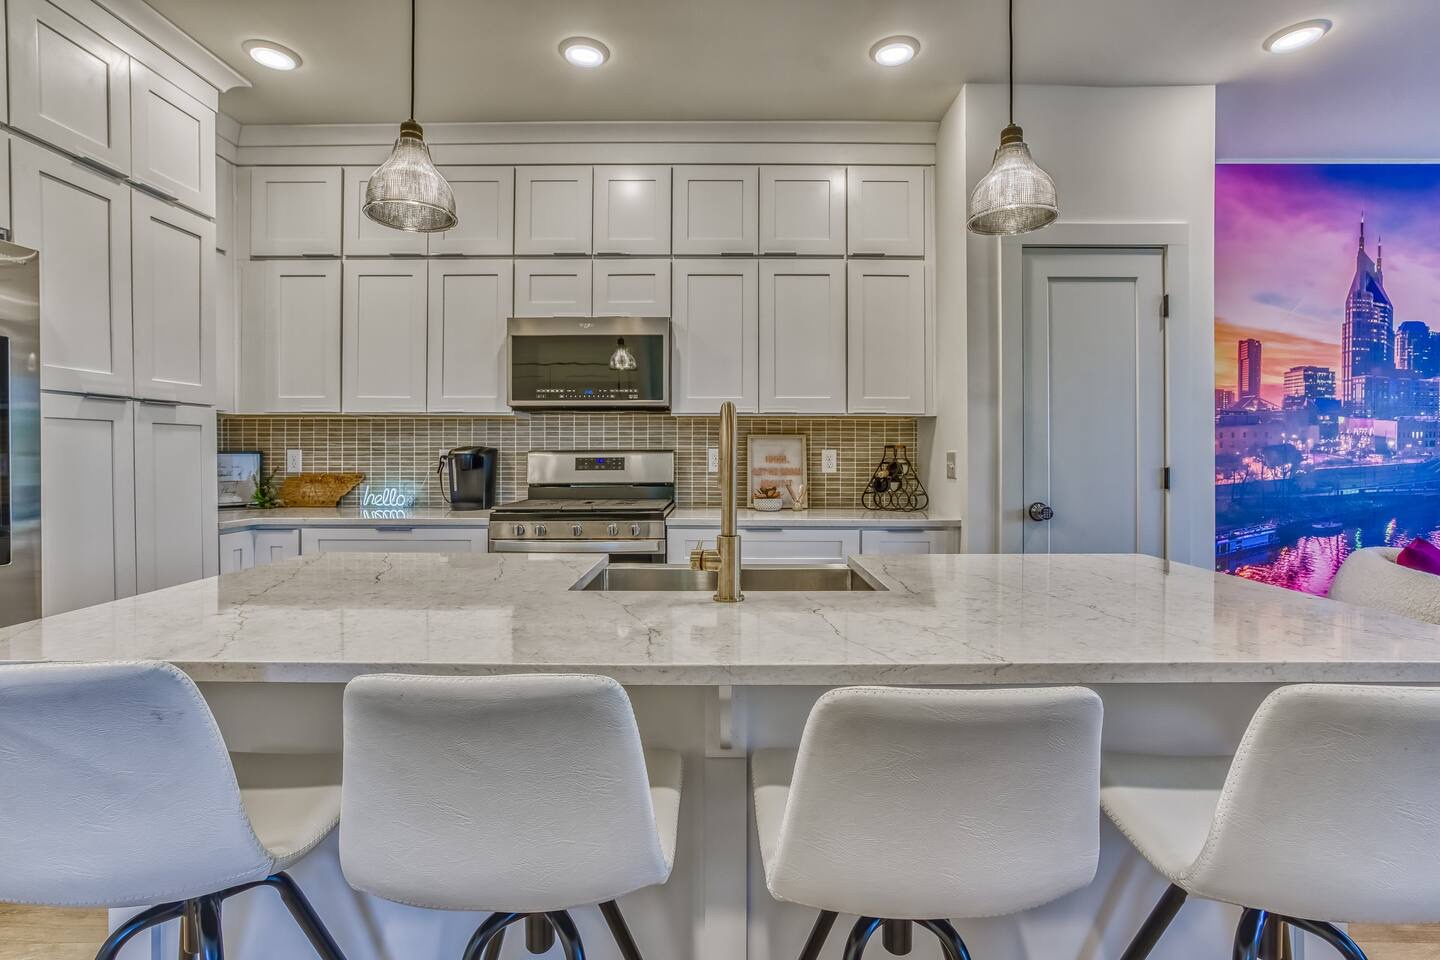 Sip morning coffee or grab a bite at the kitchen counter, with seating for 4